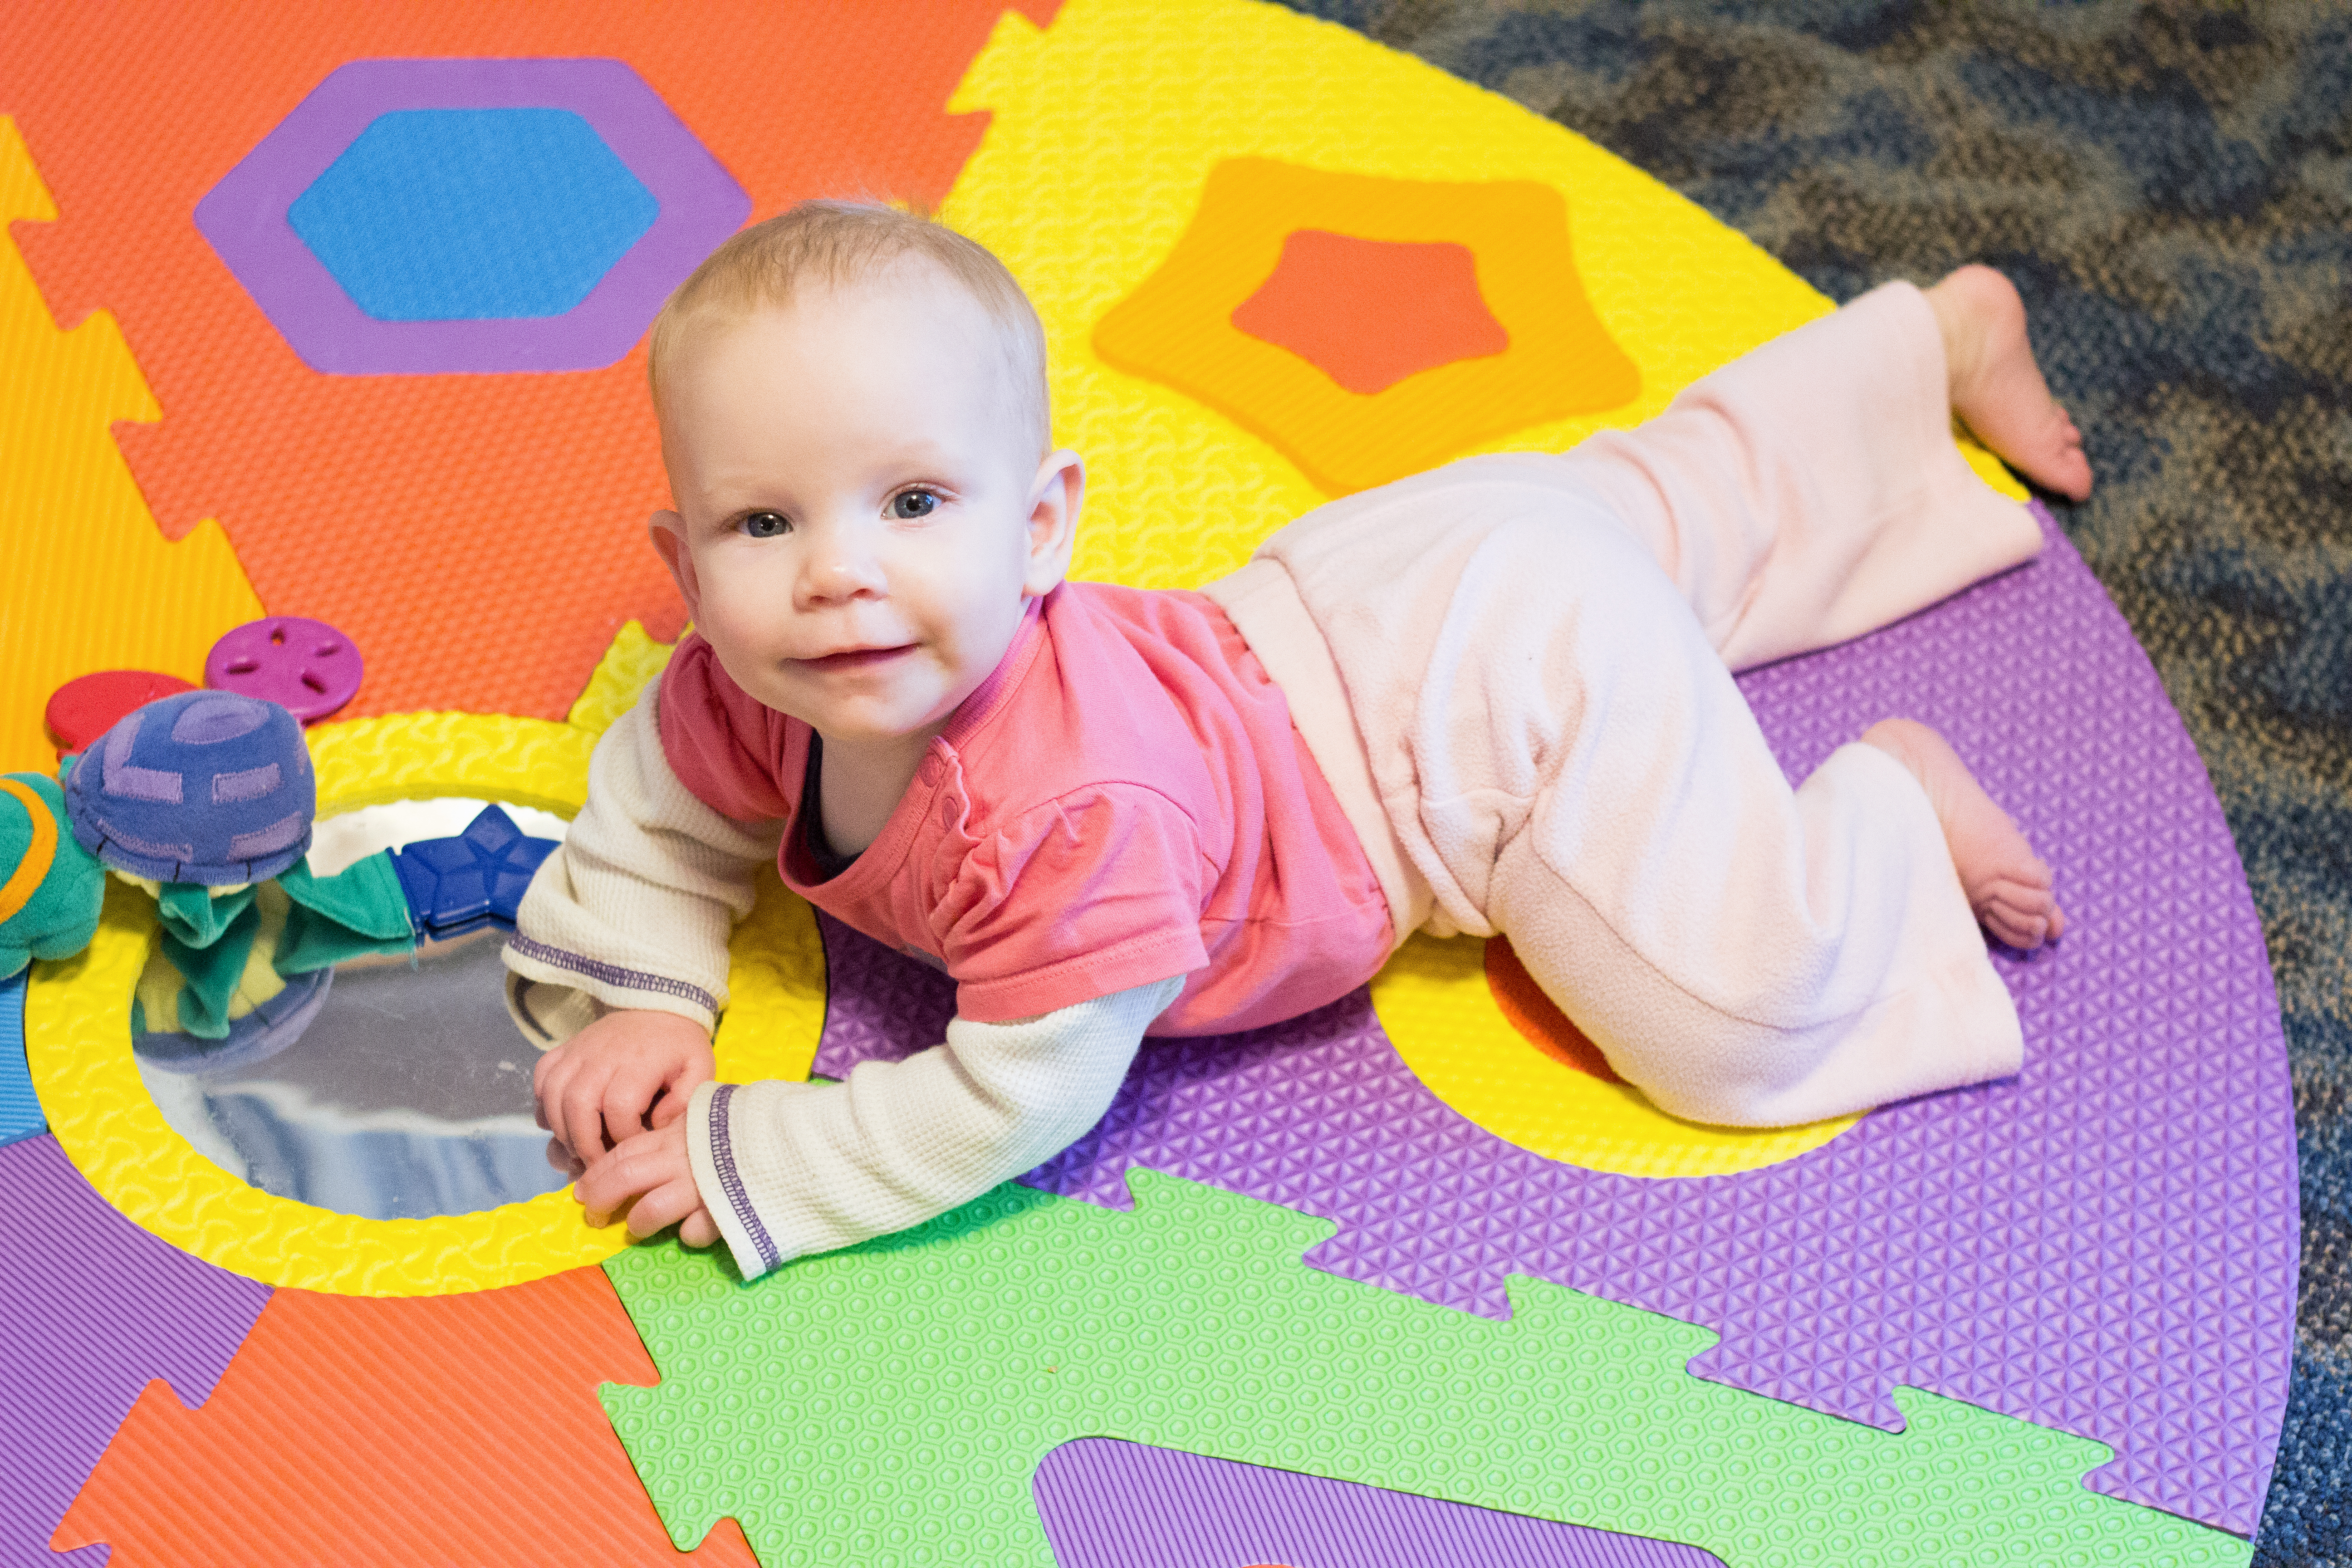 tummy time for infant at Community Child Care Center